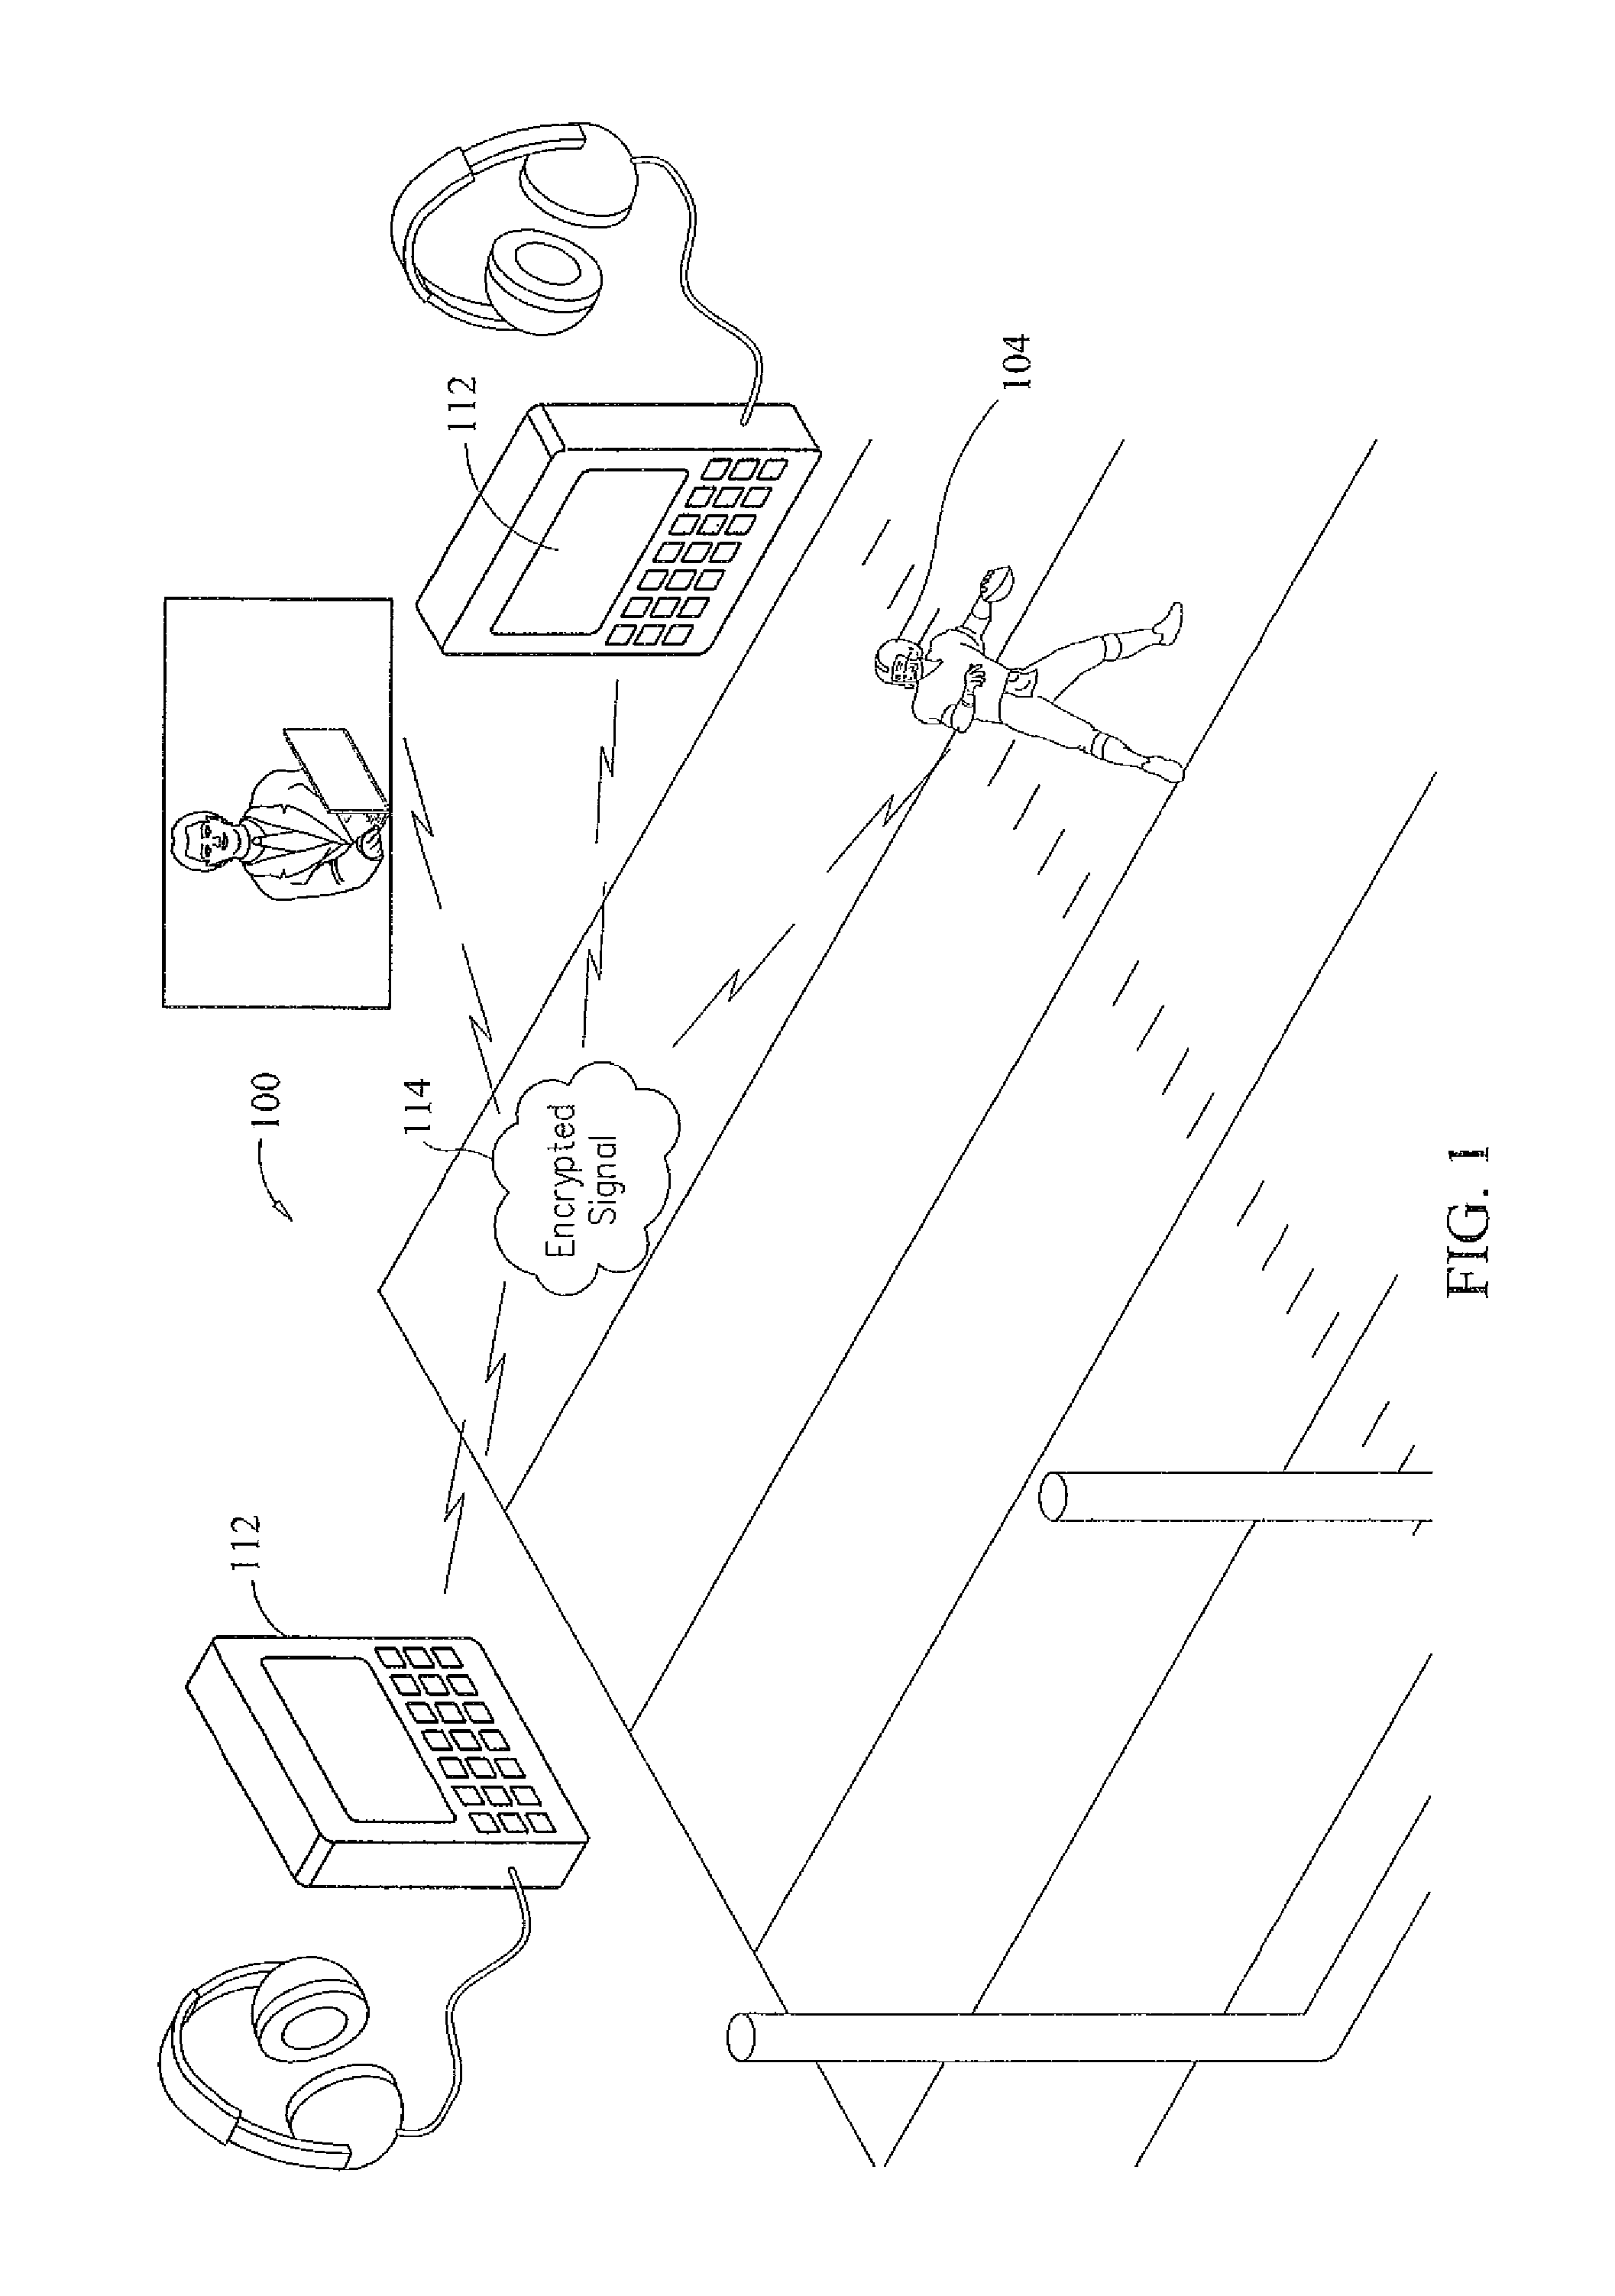 System and method of distributing game play instructions to players during a game